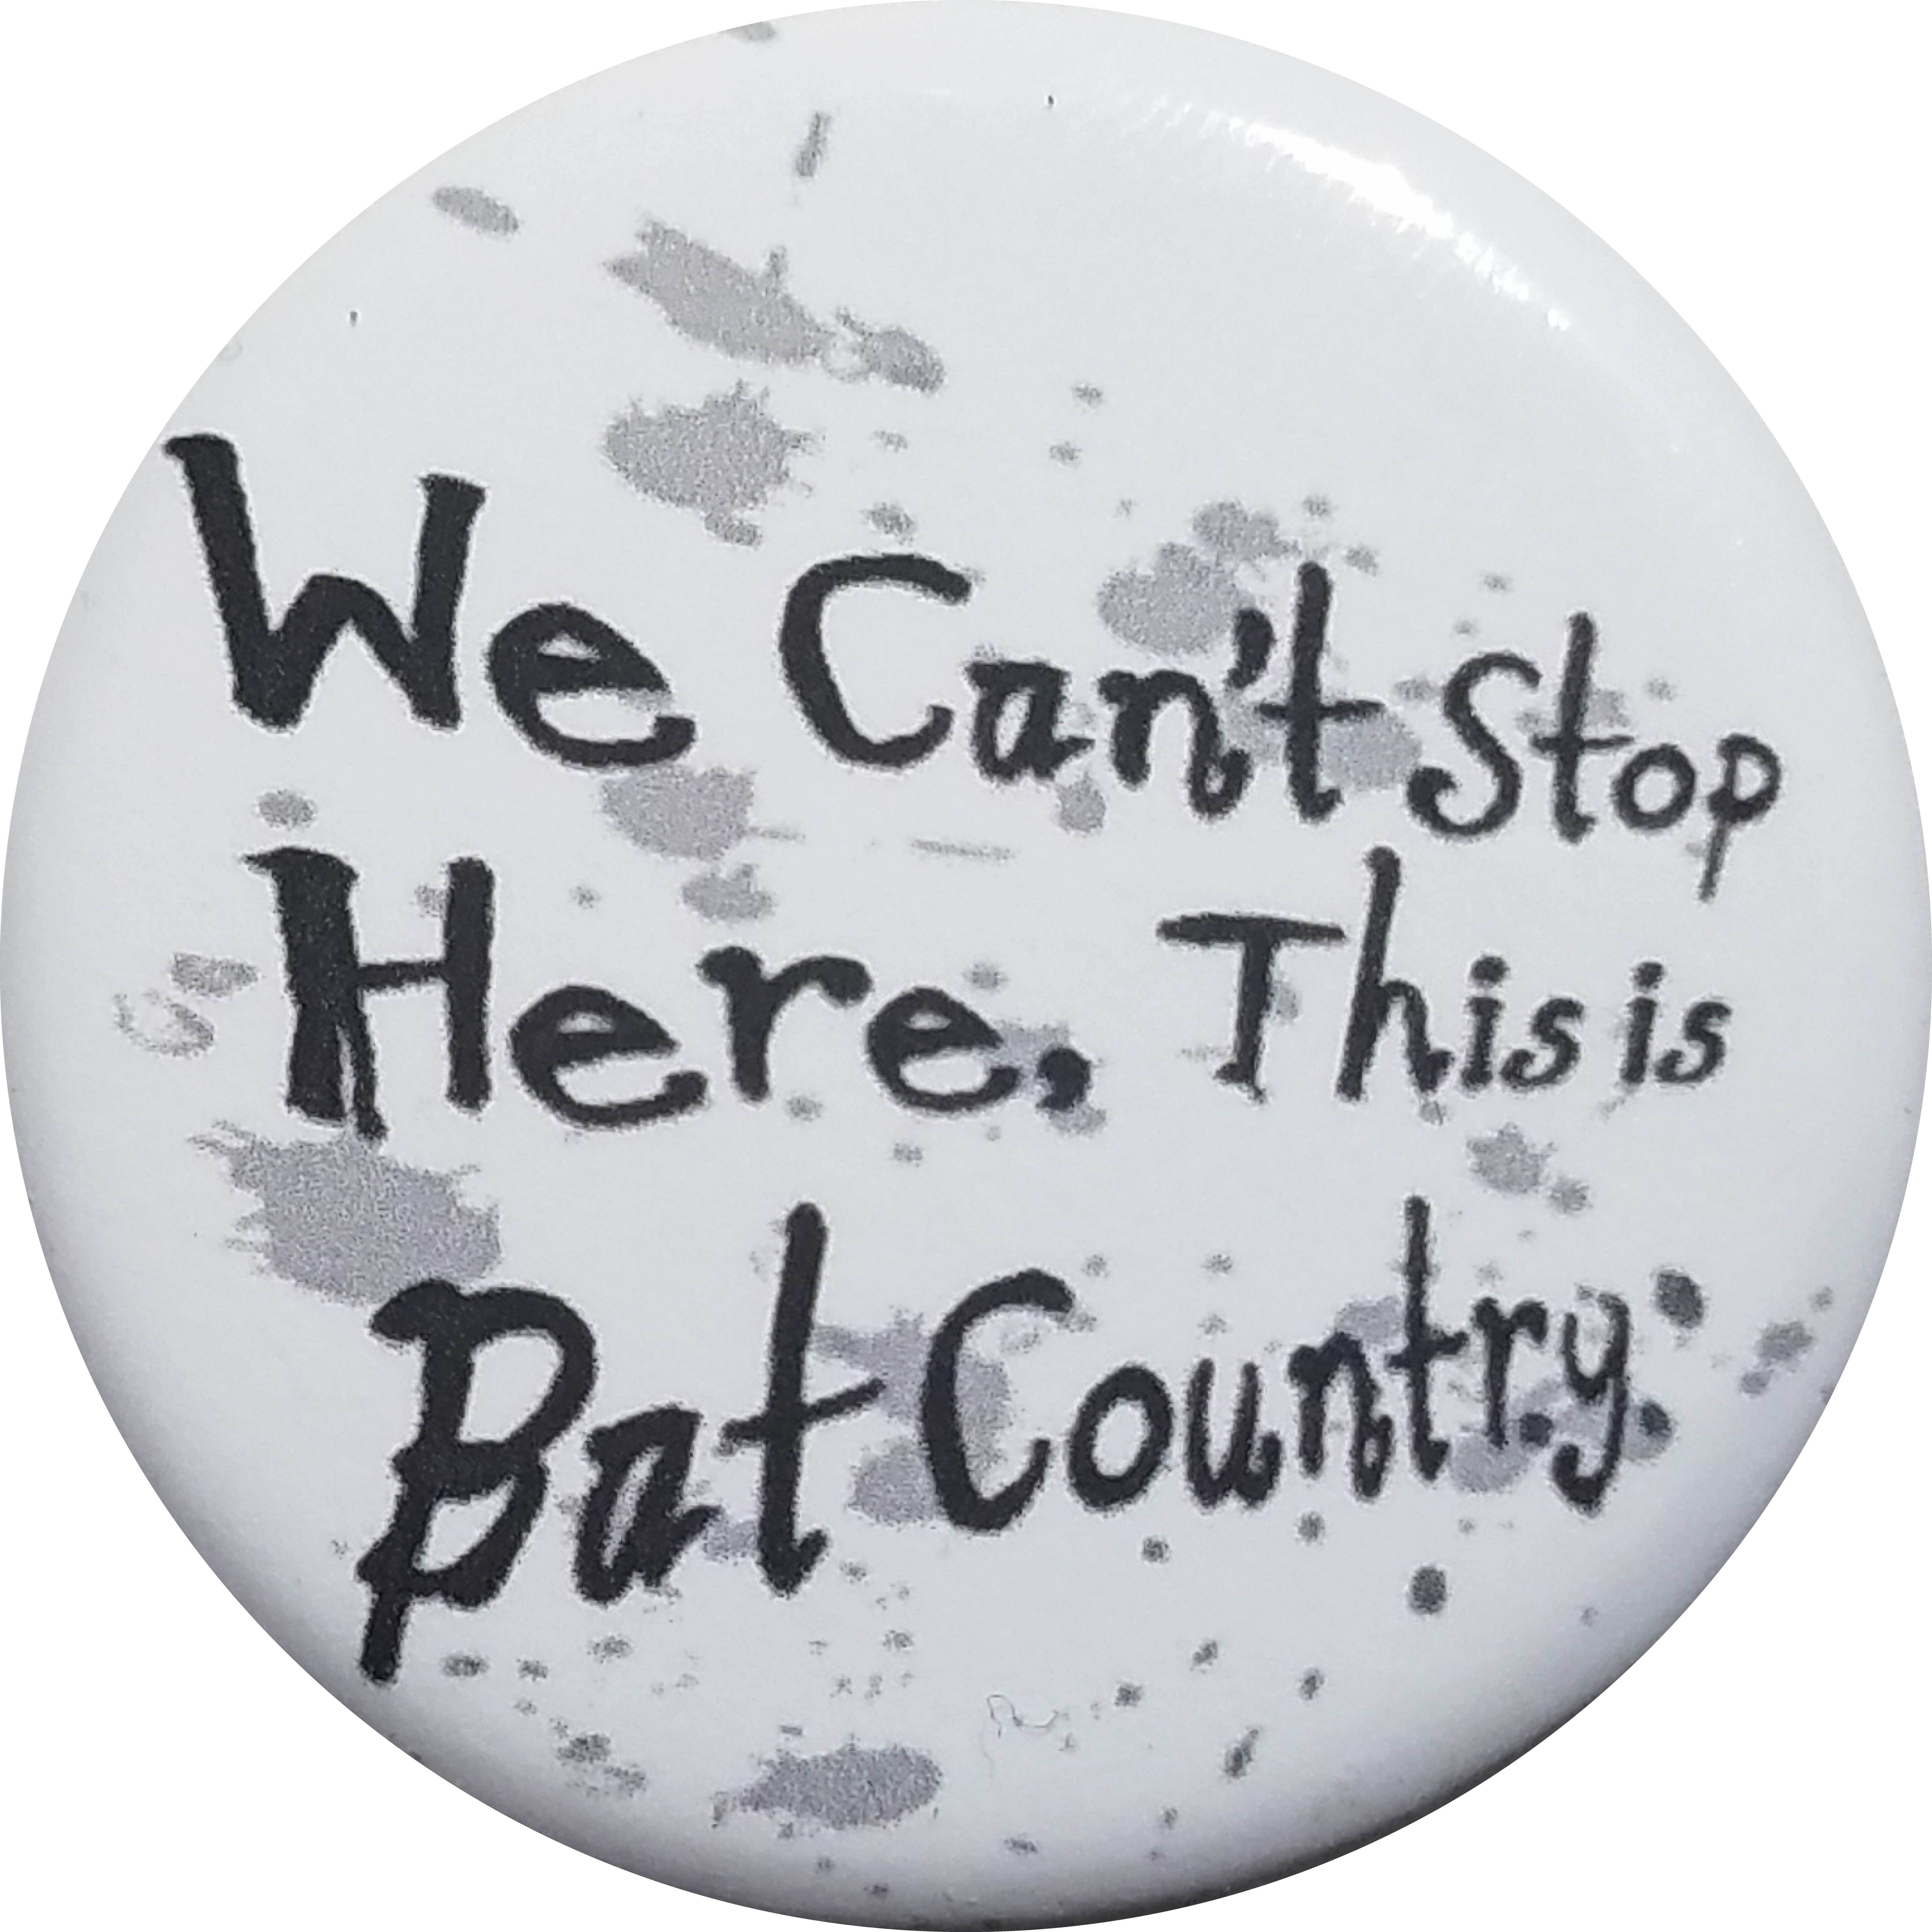 Fear And Loathing In Las Vegas Quote Bat Country Button Bottle Opener Magnet Button Lore